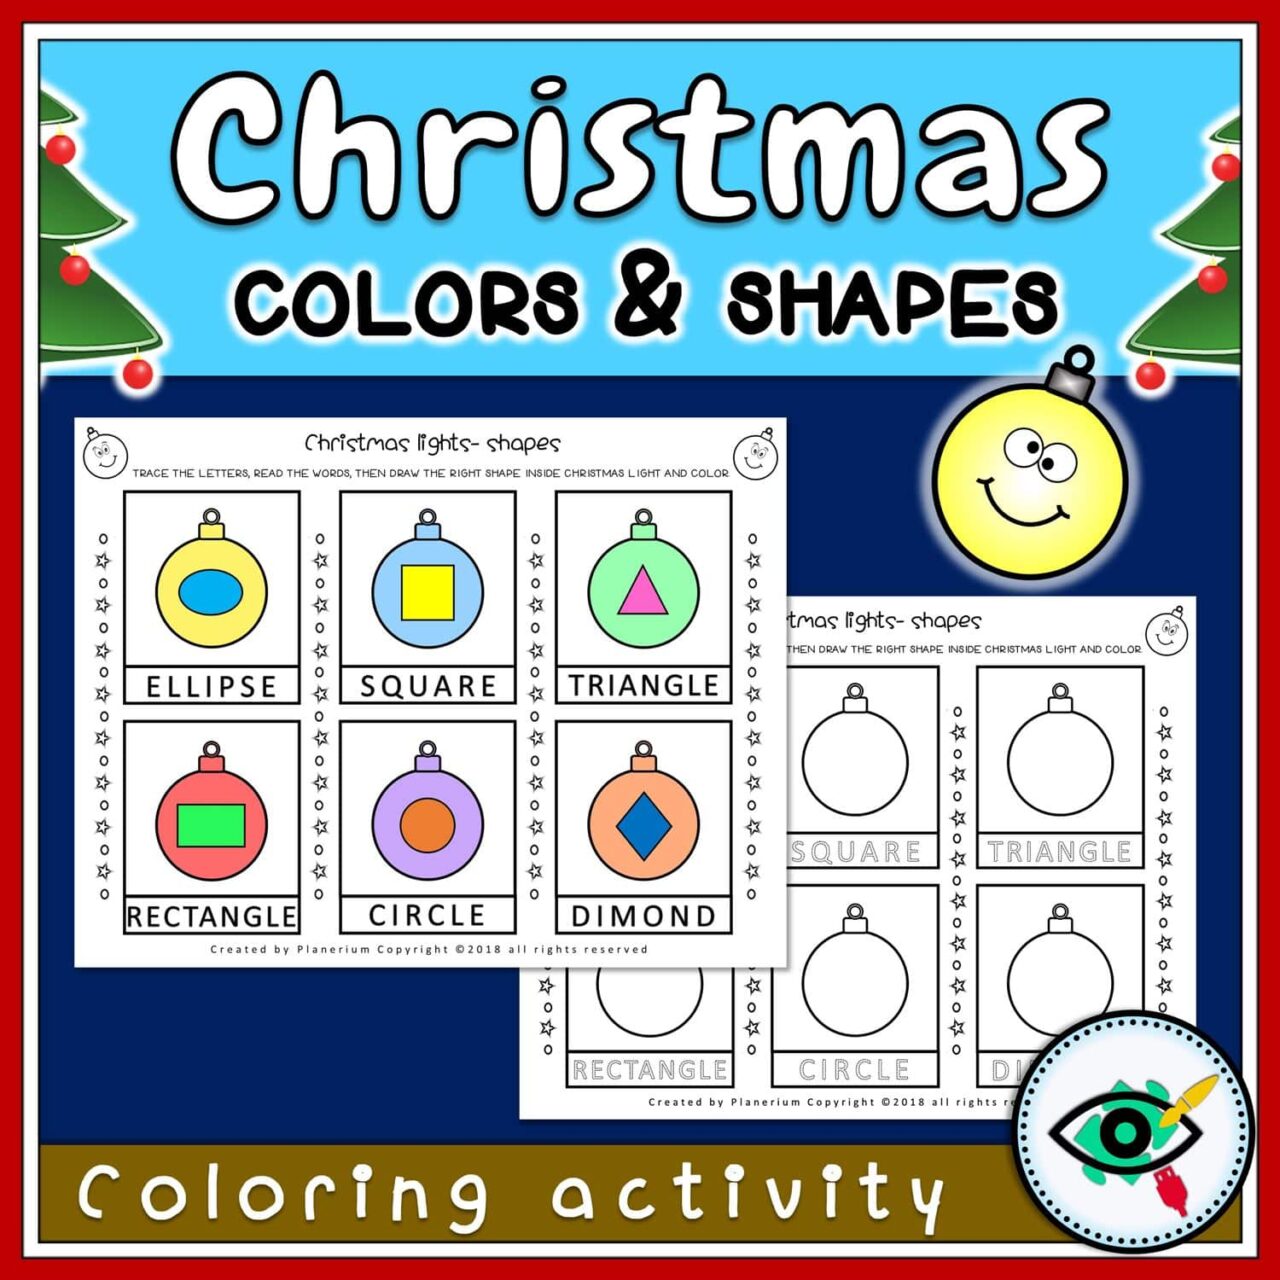 Christmas Coloring Activity - Shapes and Lights - Featured 1 | Planerium